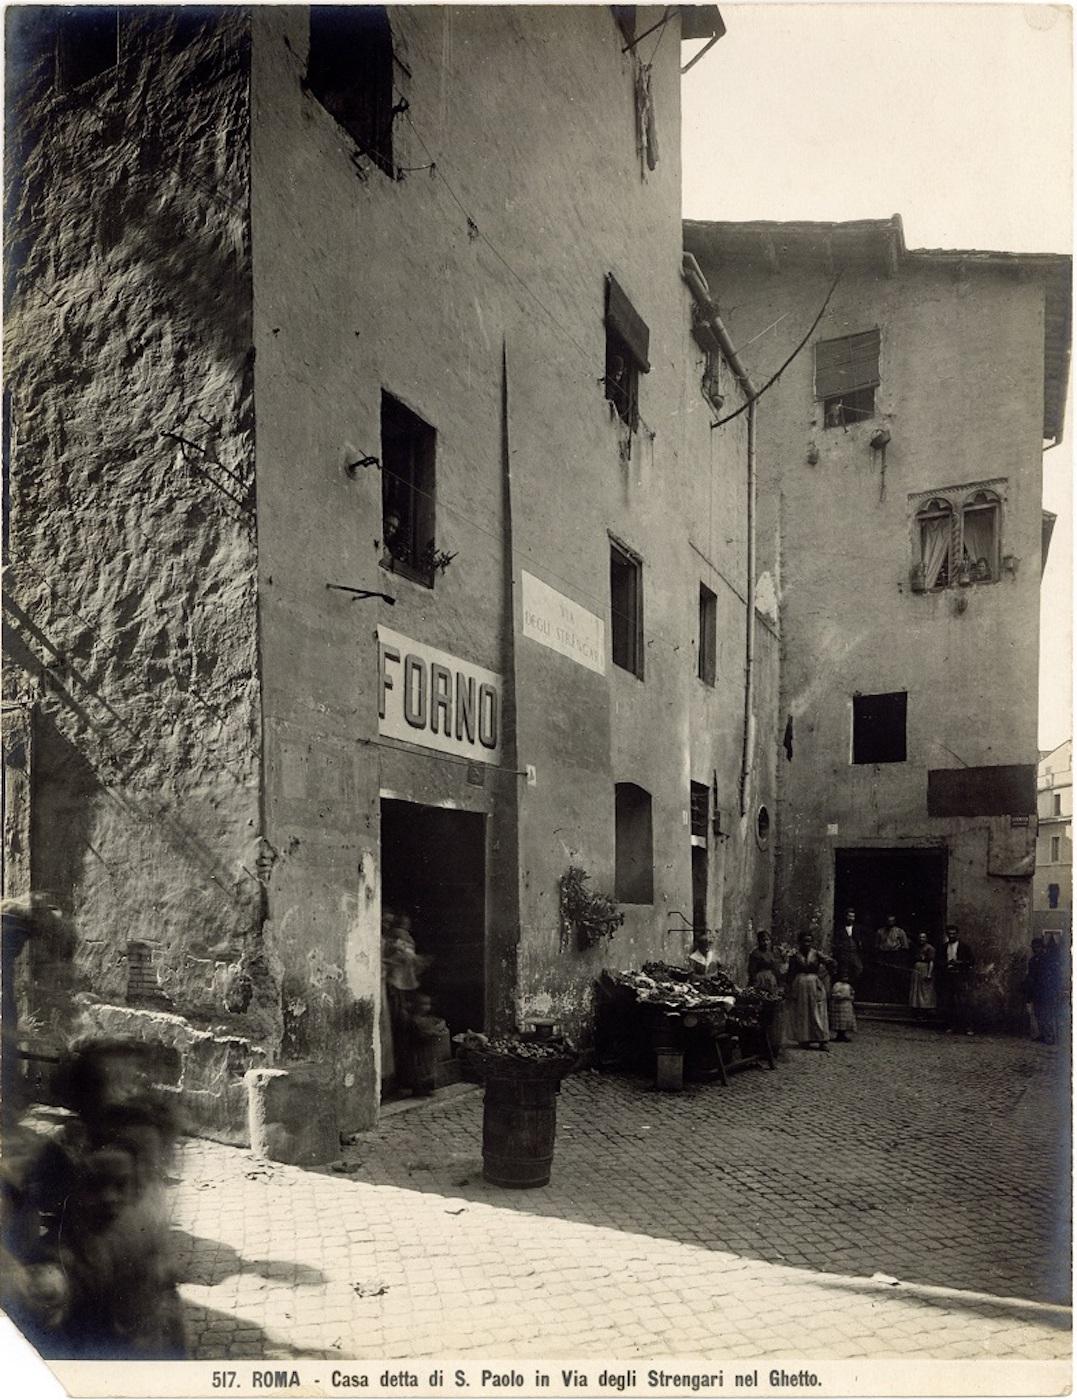 Two Vintage Views of the Ghetto in Rome by Studio Vasari - 1920s - Photograph by Unknown